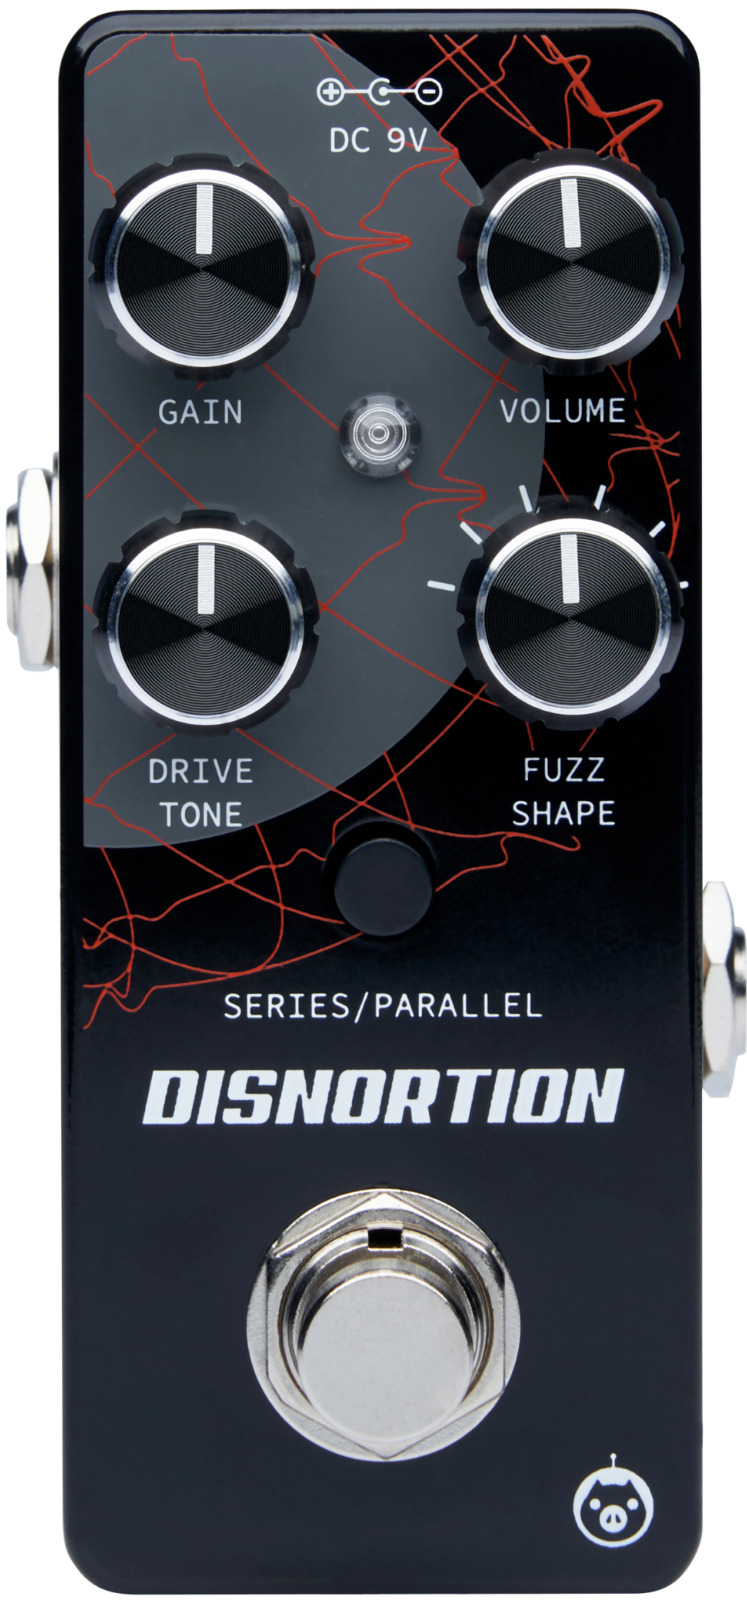 New Pigtronix Disnortion Distortion Effects Pedals Black, Fuzz Overdrive NIB